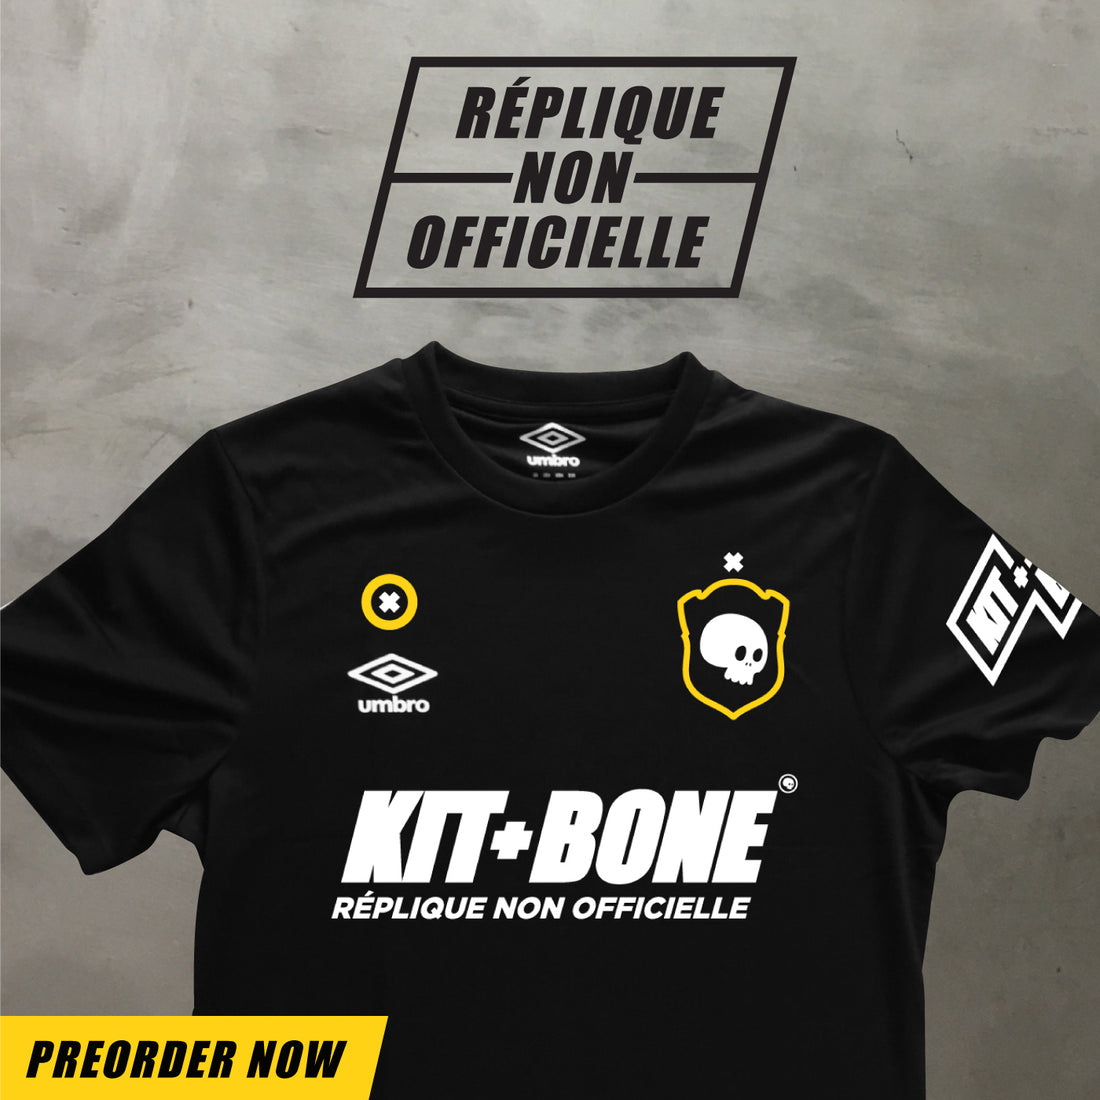 Kit and Bone release Unofficial Replica series